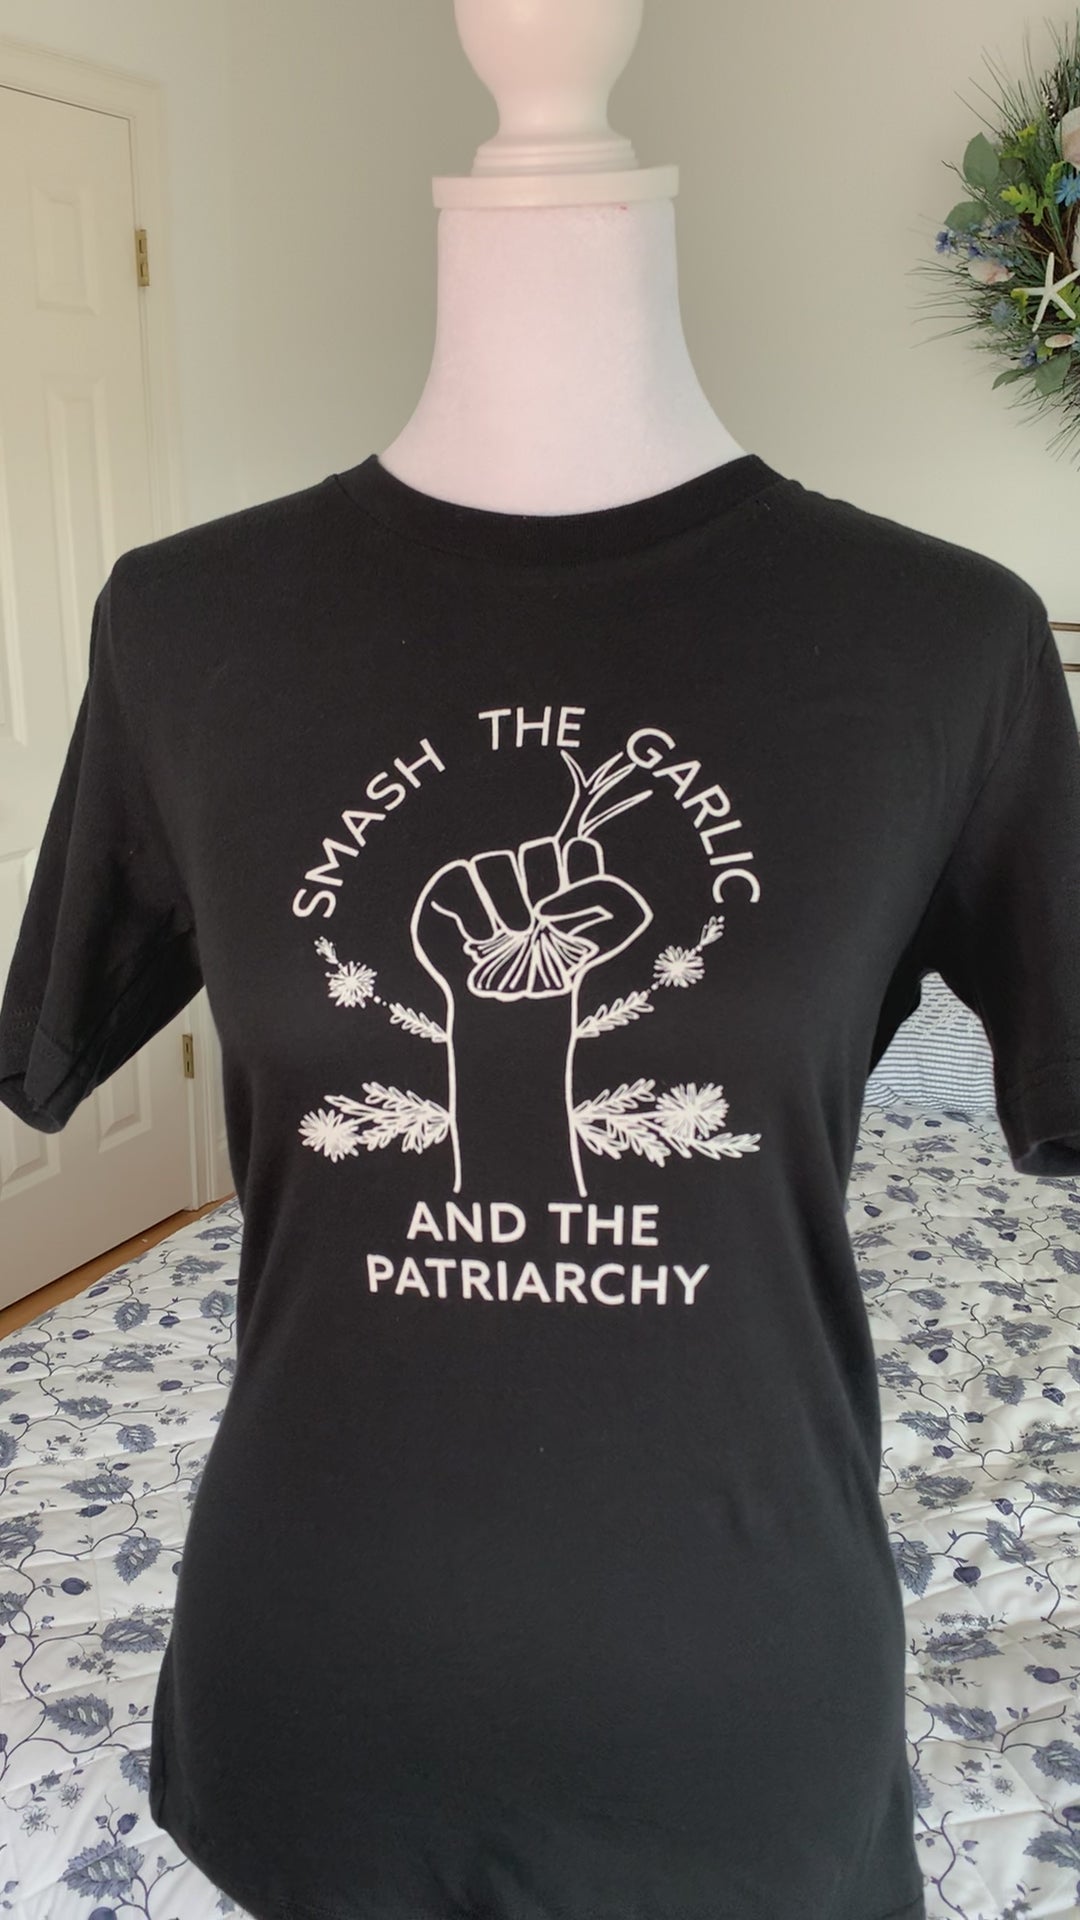 A black tee with the words "Smash the Garlic and the Patriarchy" and an illustration of a hand holding garlic hangs on a manikin